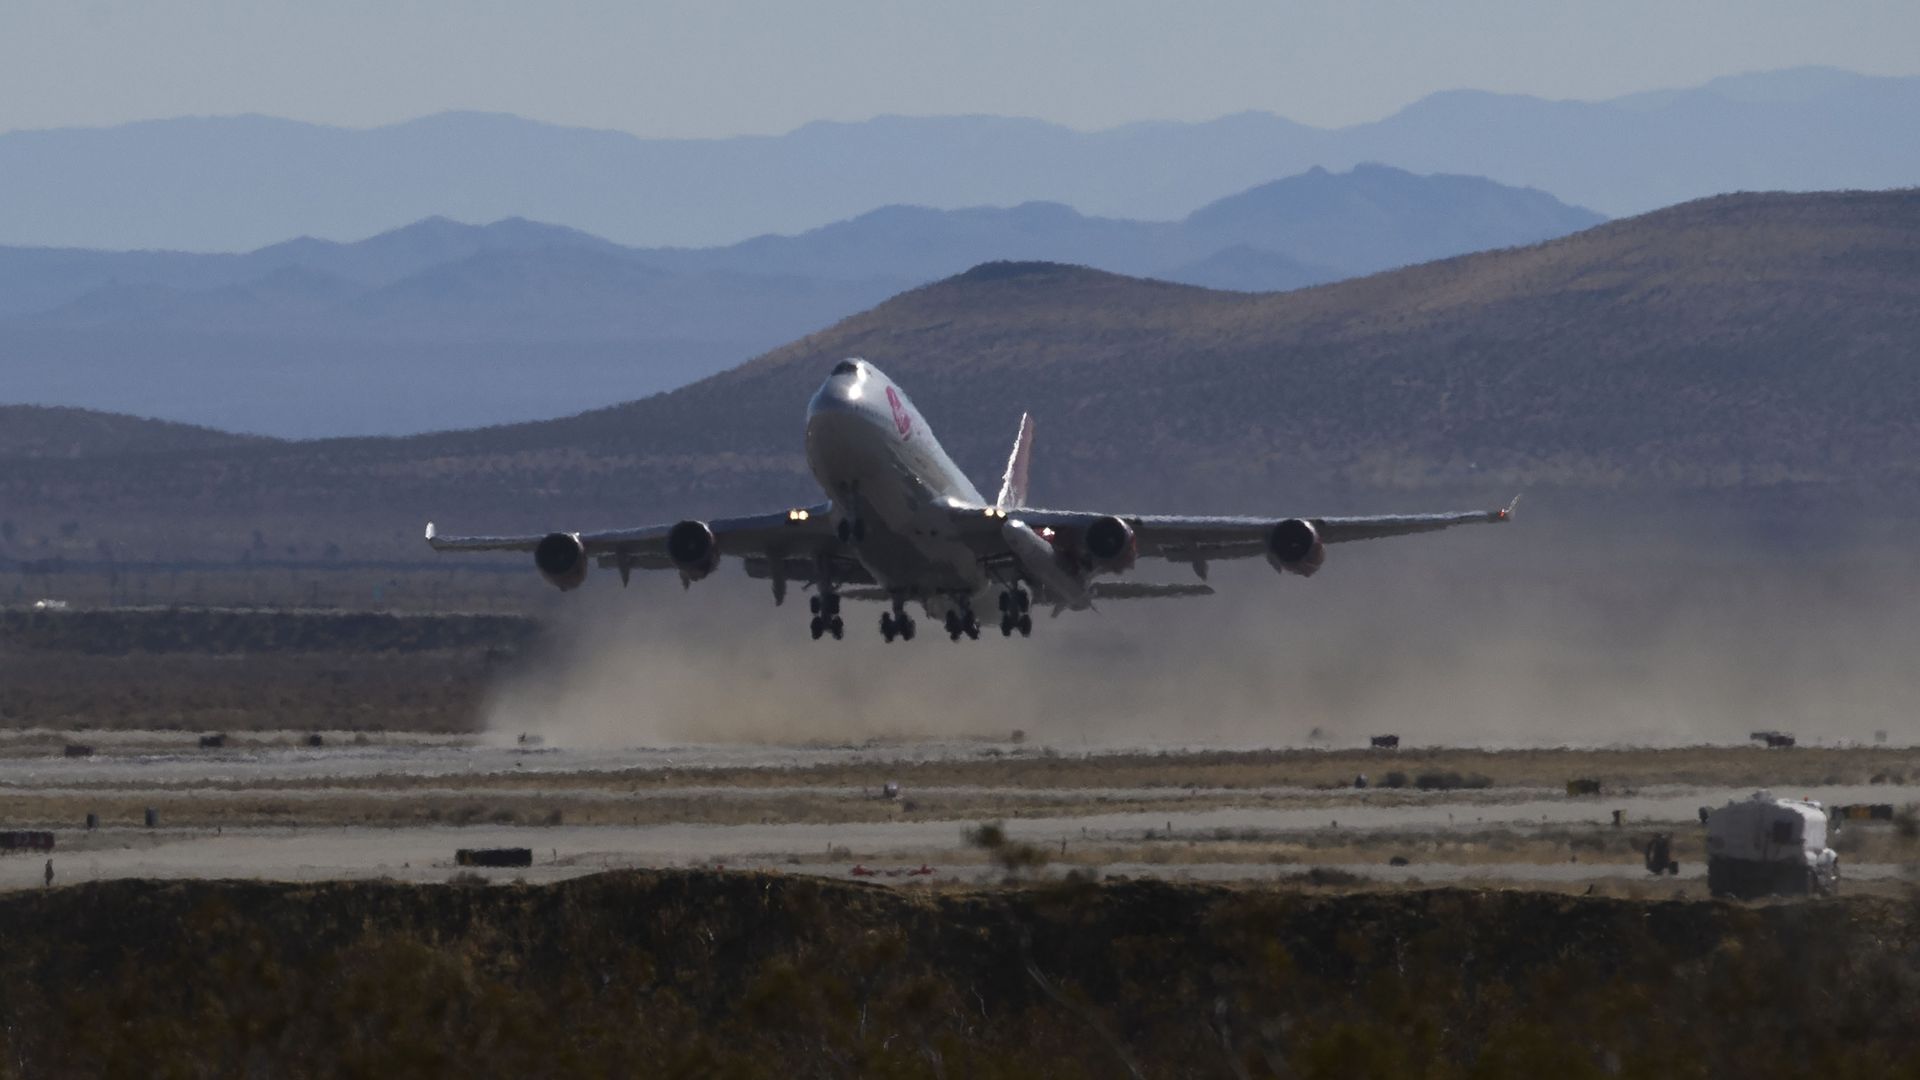 The Virgin Orbit "Cosmic Girl" takes off for the Launch Demo 2 mission from Mojave Air and Space Port on January 17, 2021 in Mojave, California. 